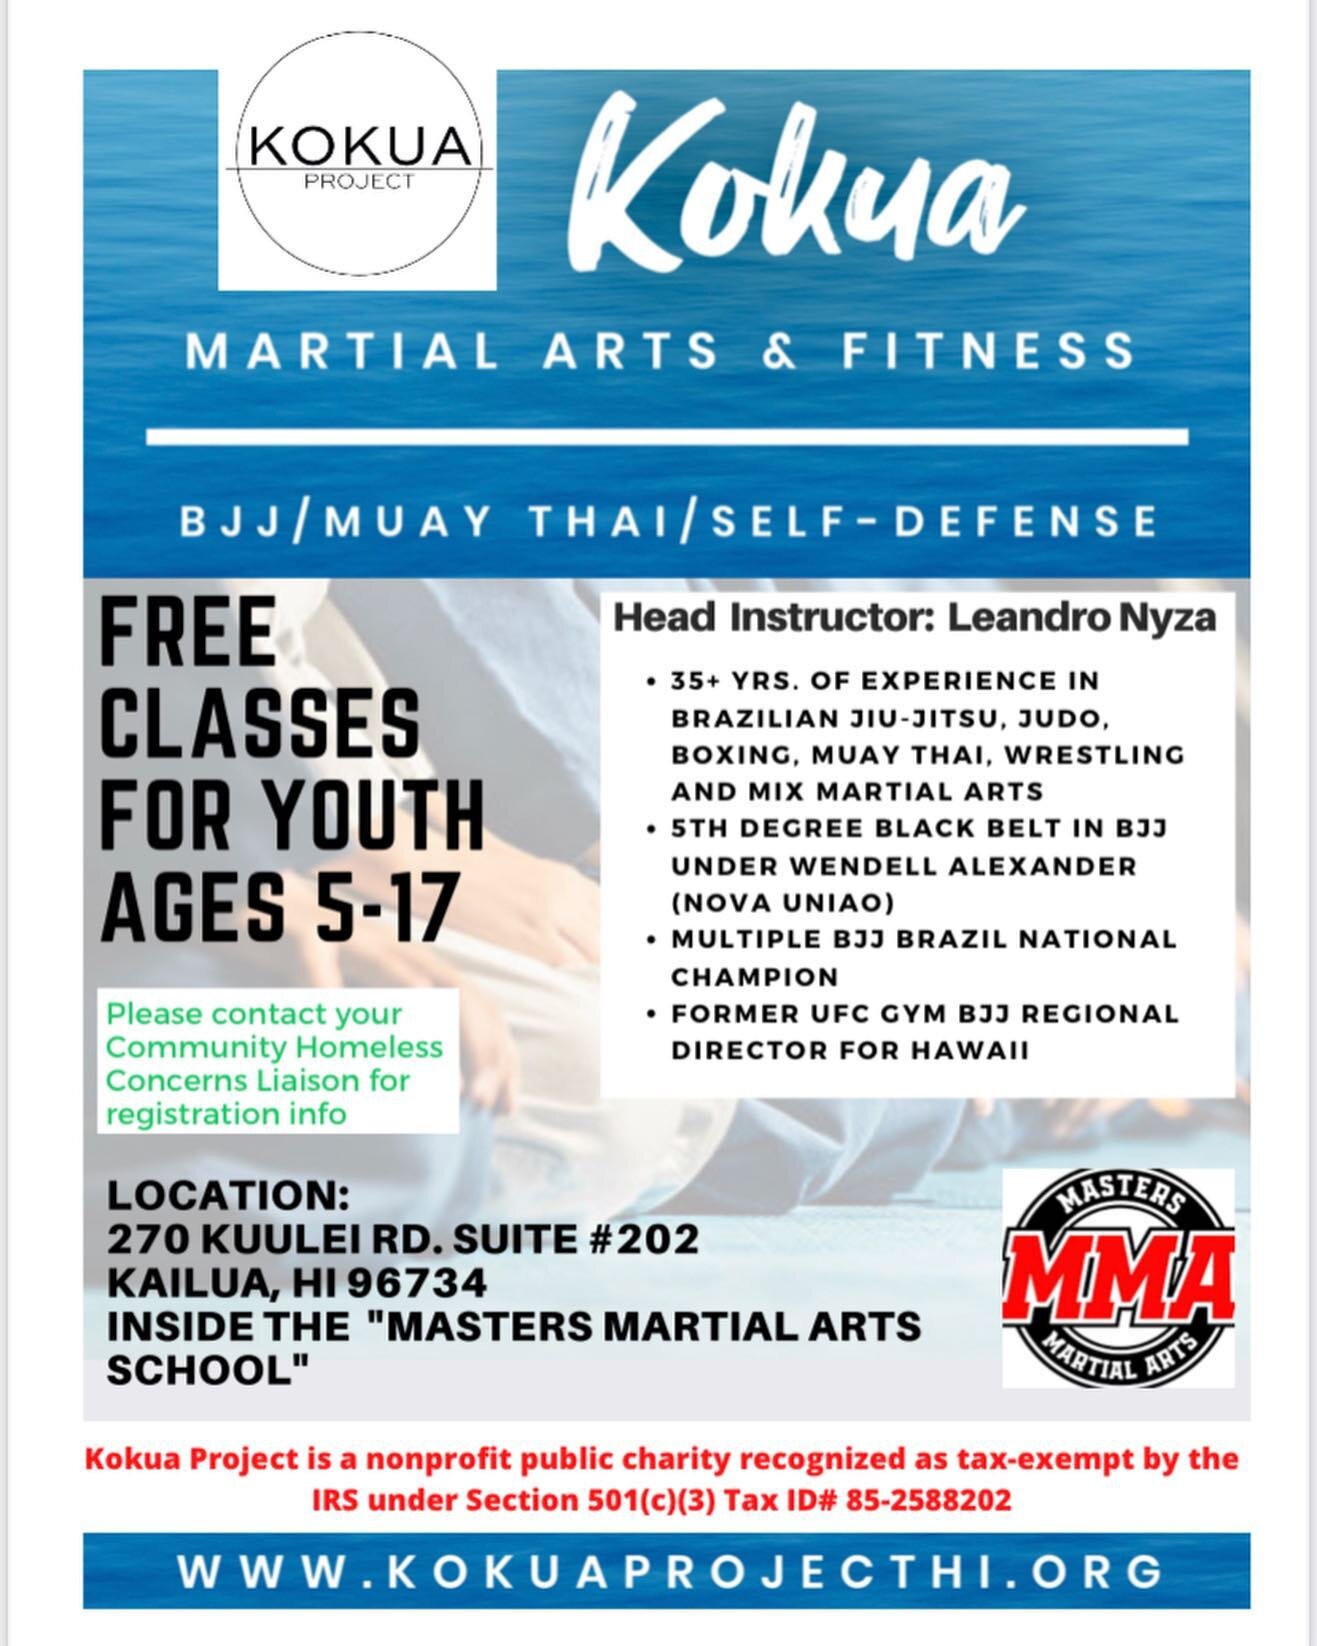 #kokuaproject is now offering FREE martial arts classes to youth ages 5-17 for qualified applicants. Please contact your district &ldquo;Community Homeless Concerns Liaison&rdquo; for information on registering for your free classes.  If you are curr